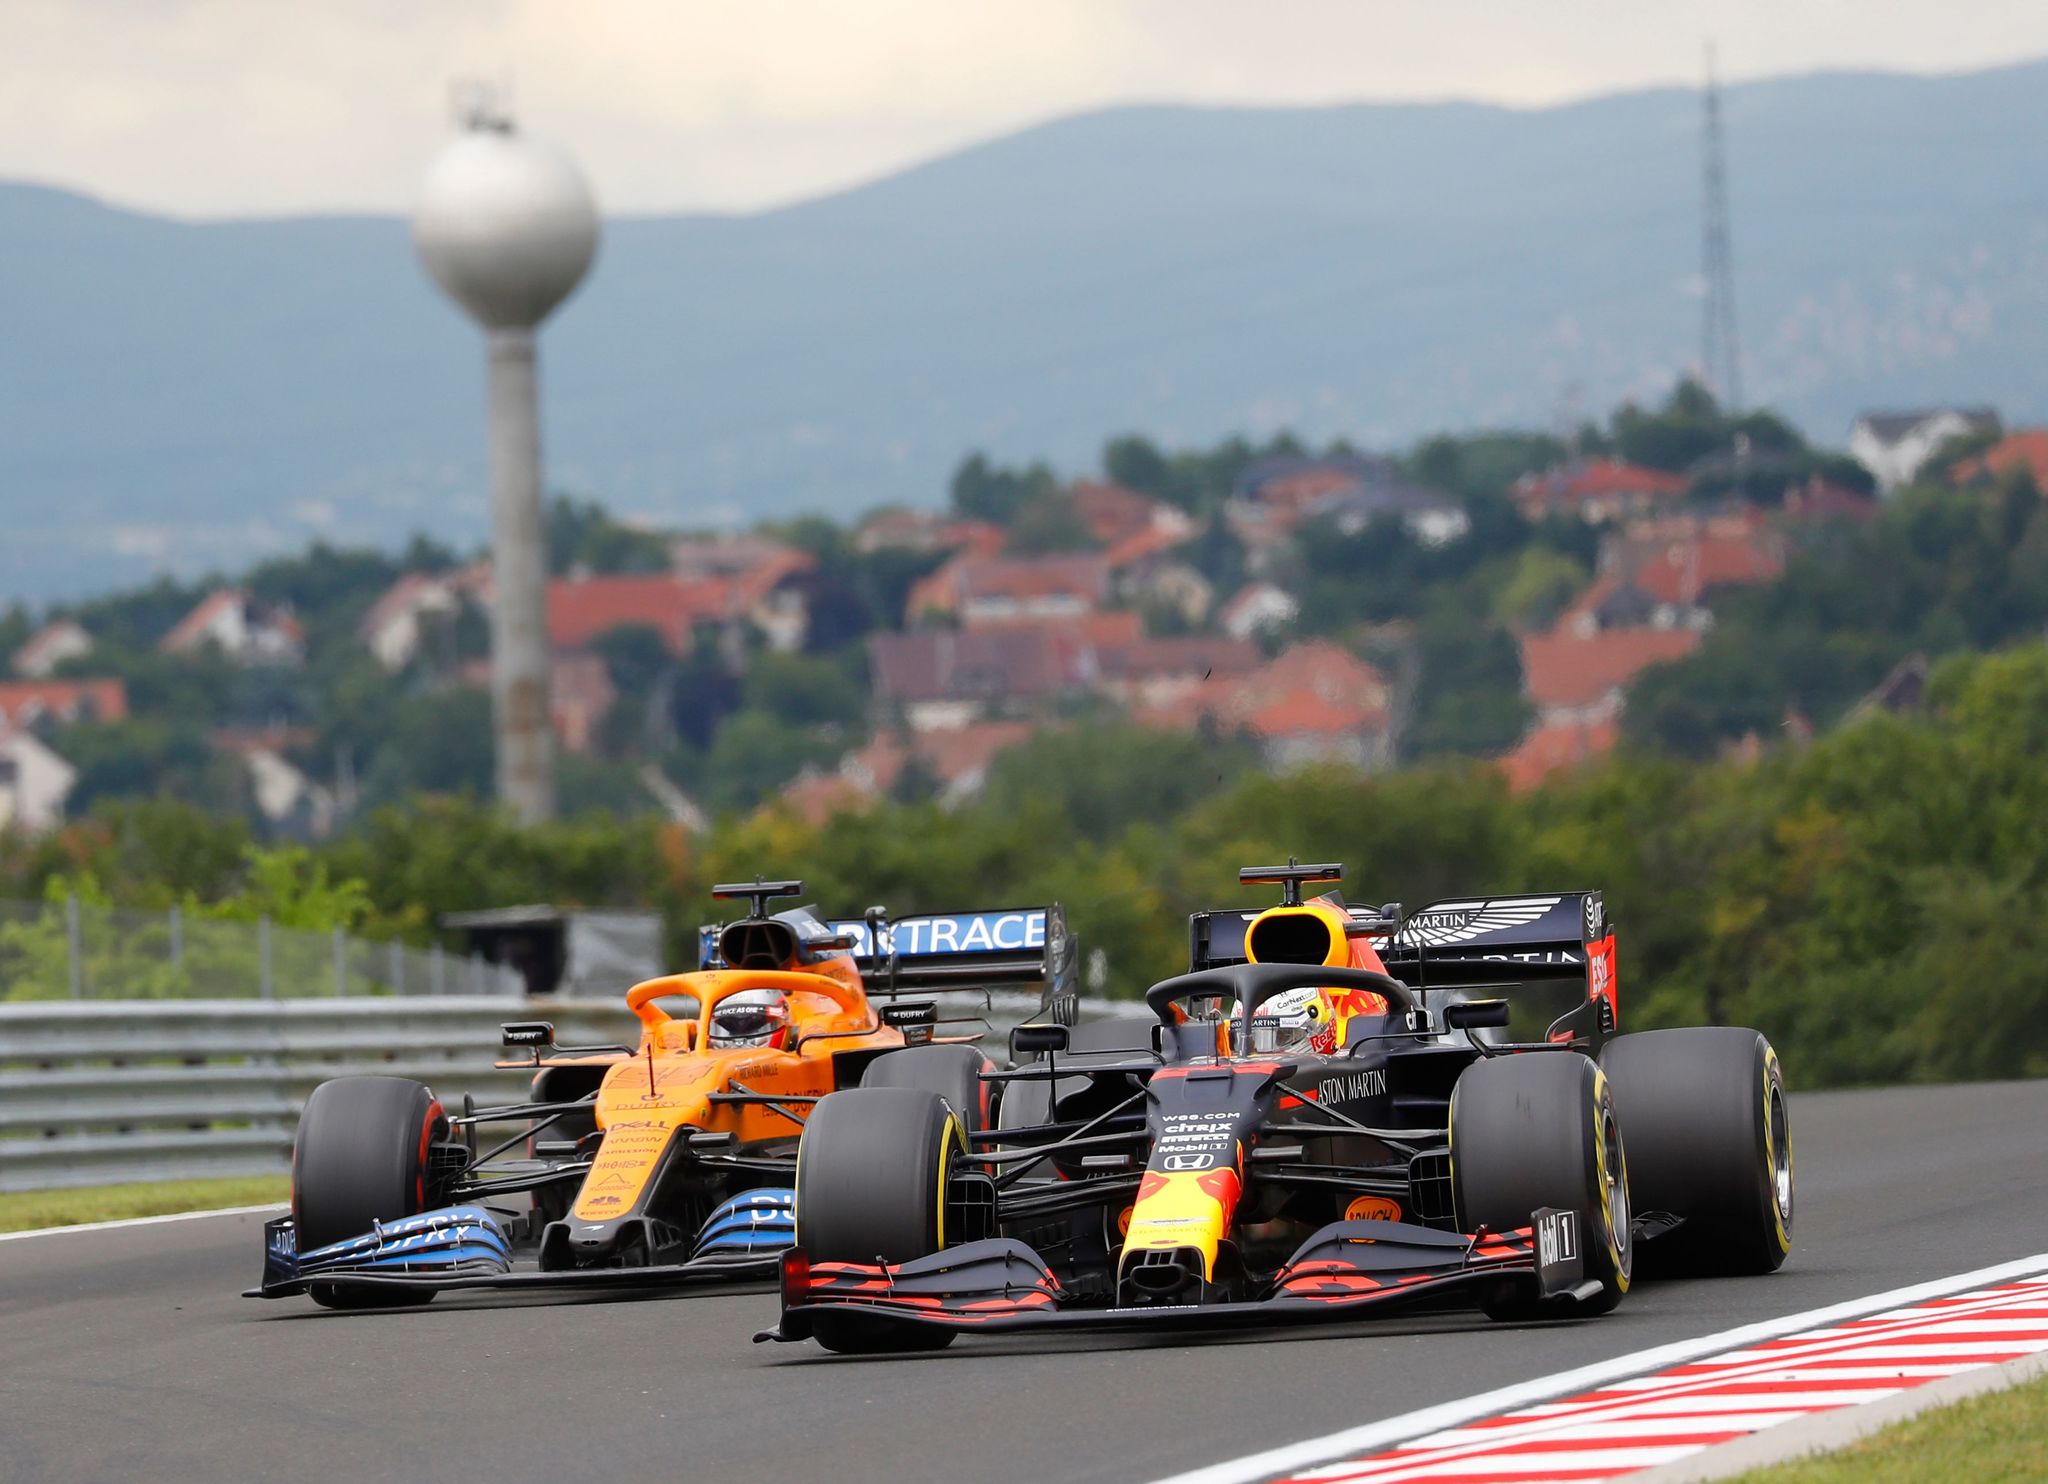 McLarens Spanish driver lt;HIT gt;Carlos lt;/HIT gt; lt;HIT gt;Sainz lt;/HIT gt; Jr (L) and Red Bulls Dutch driver Max Verstappen steer their cars during the third practice session for the Formula One Hungarian Grand Prix at the Hungaroring circuit in Mogyorod near Budapest, Hungary, on July 18, 2020. (Photo by Leonhard Foeger / POOL / AFP)